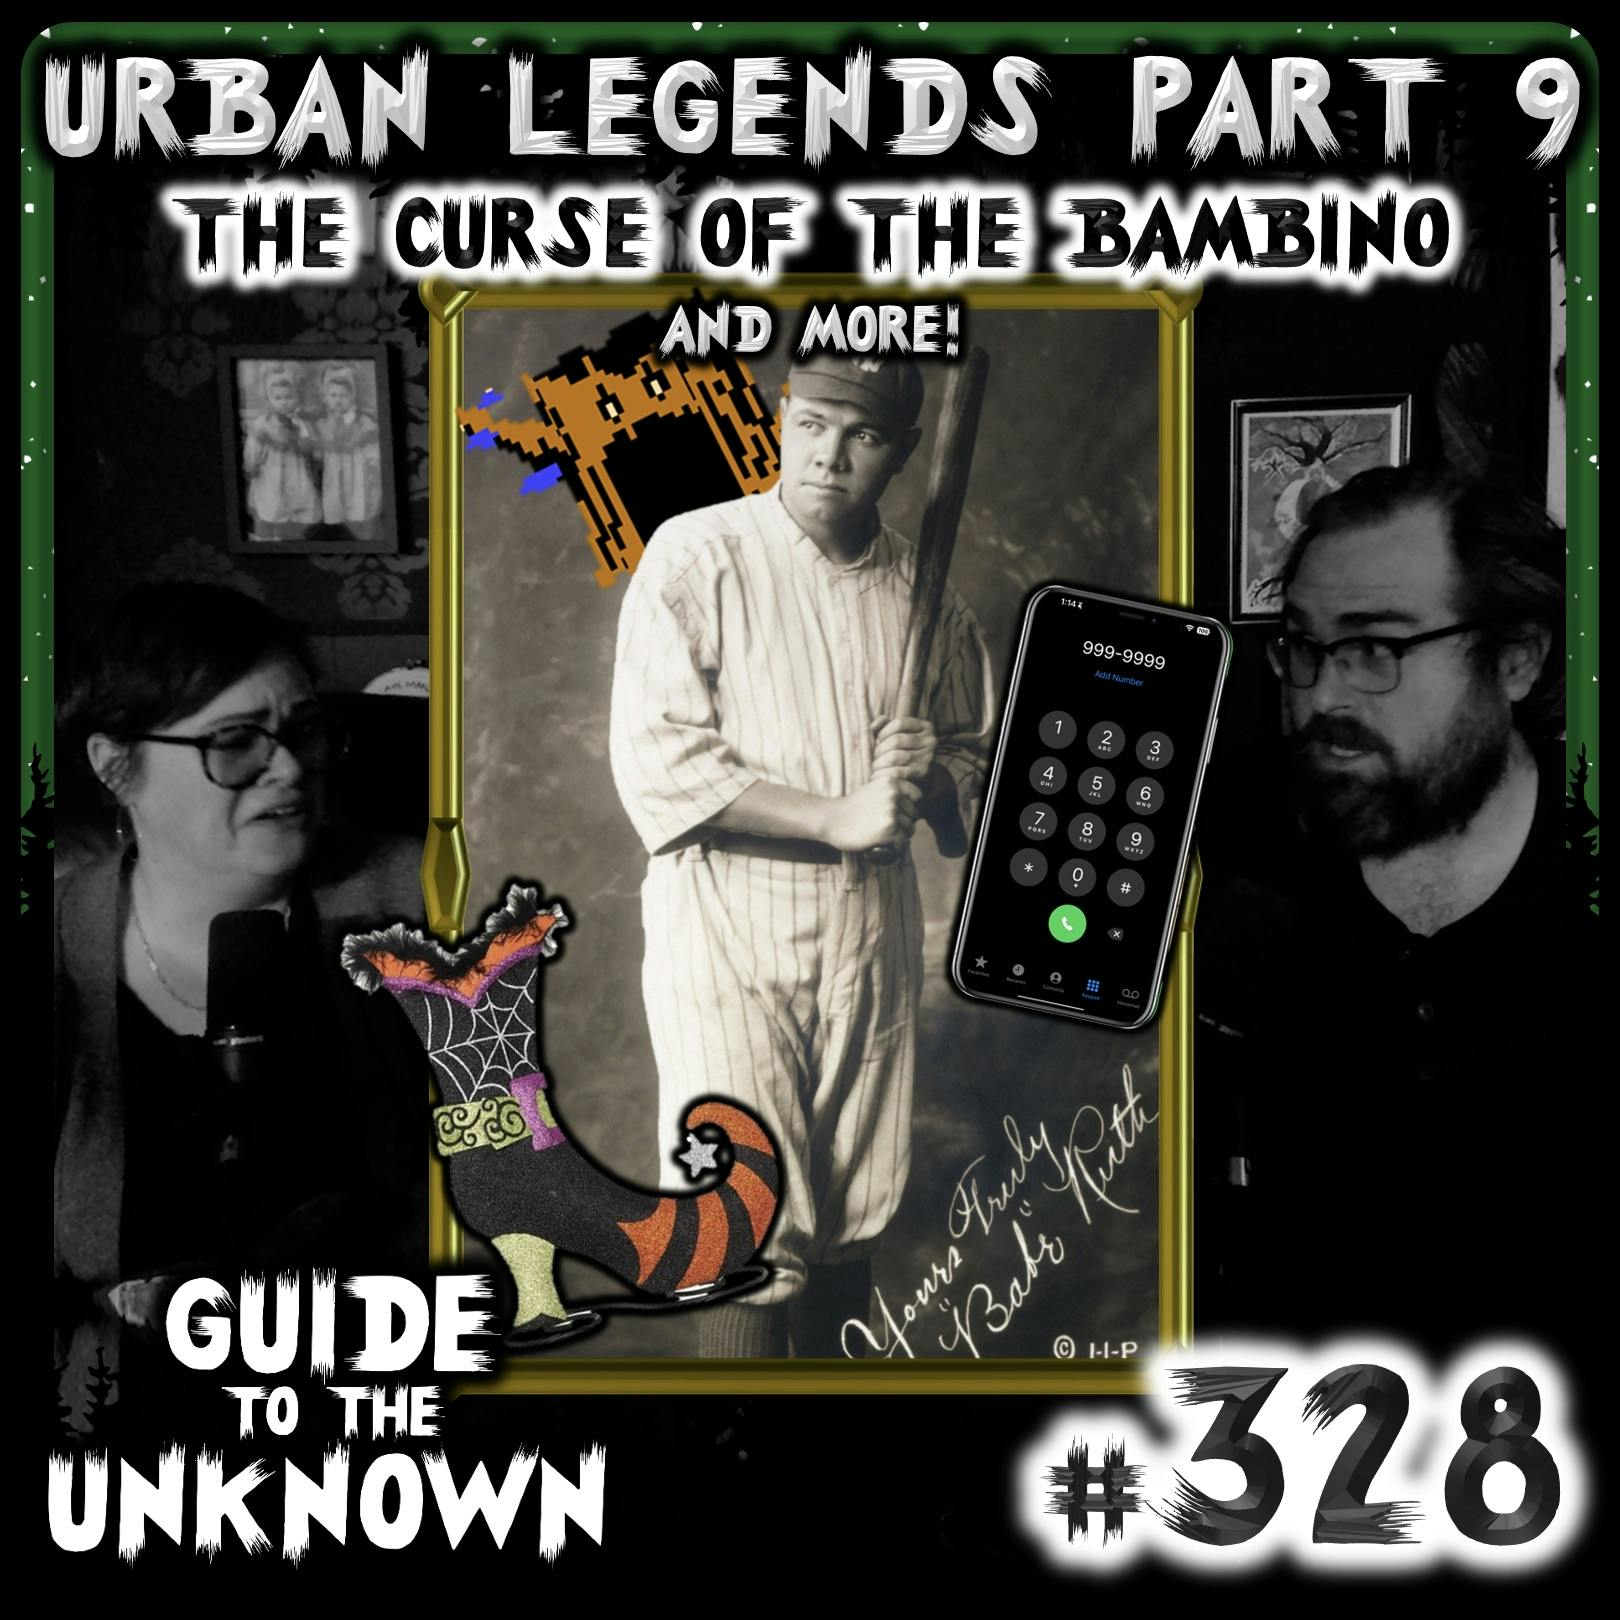 328: The Curse of the Bambino (URBAN LEGENDS Part 9)